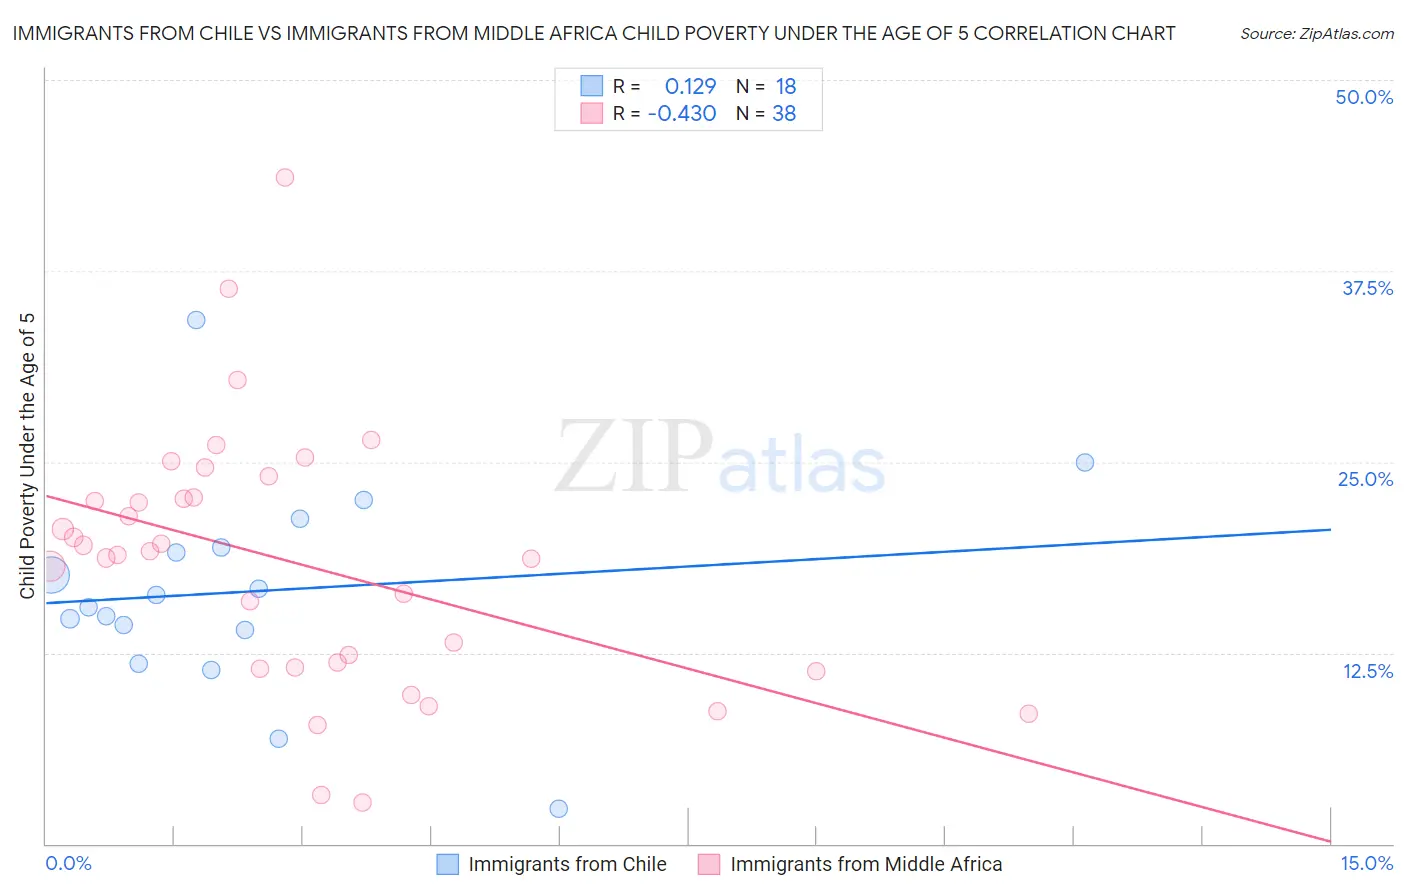 Immigrants from Chile vs Immigrants from Middle Africa Child Poverty Under the Age of 5